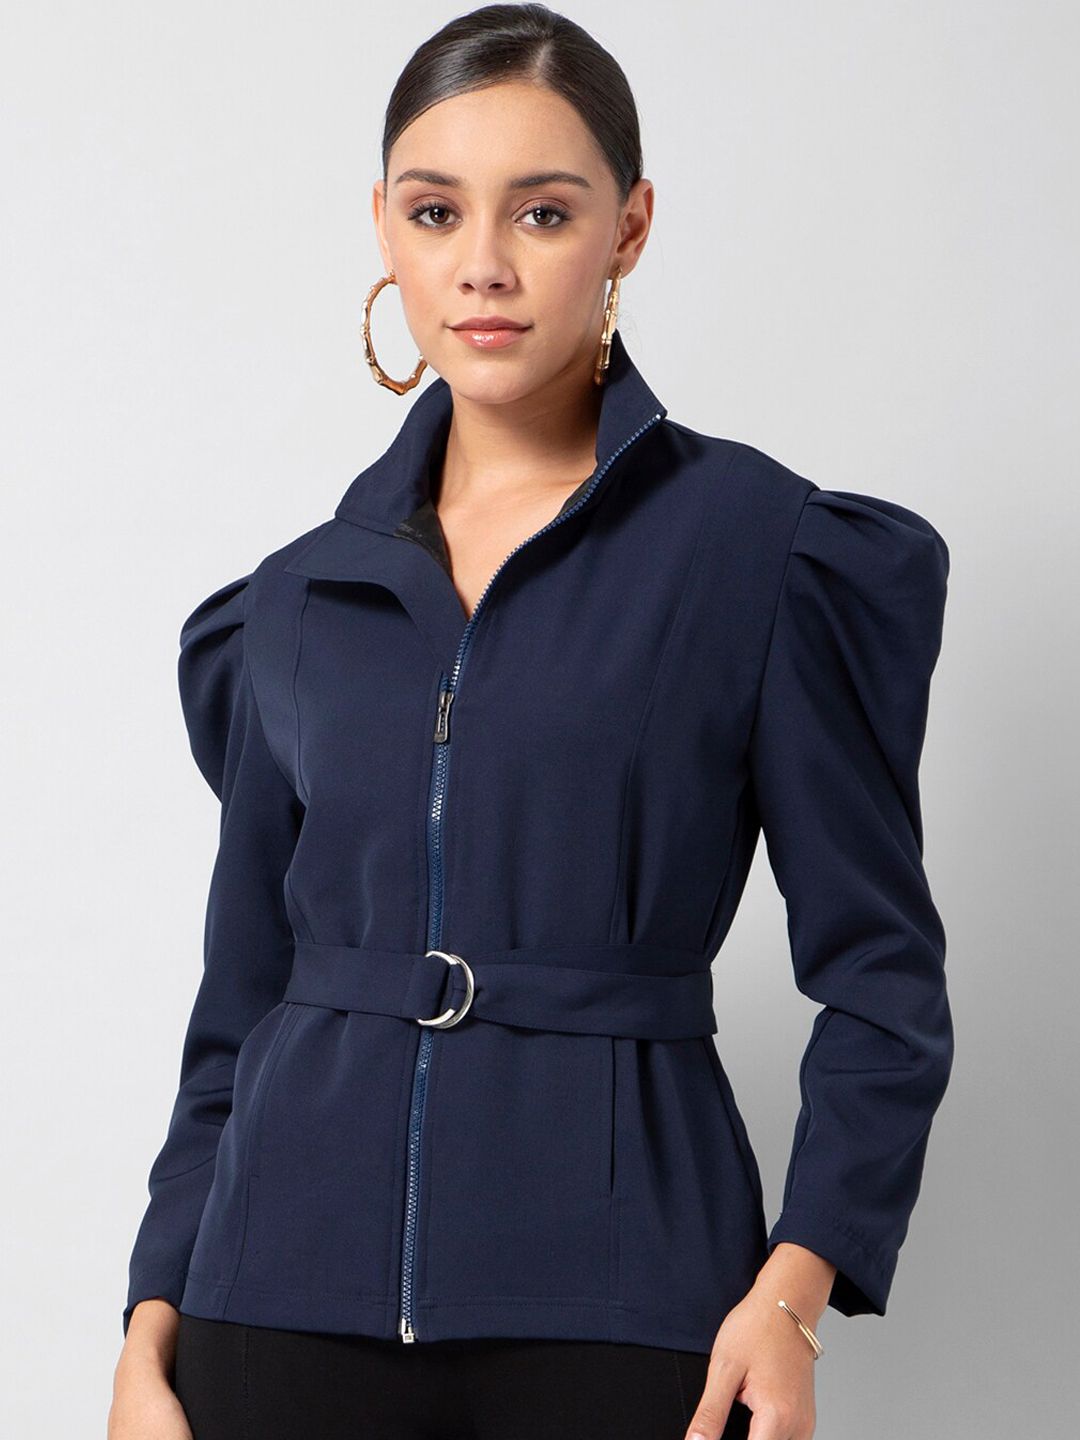 FabAlley Women Navy Blue Solid Tailored Jacket Price in India